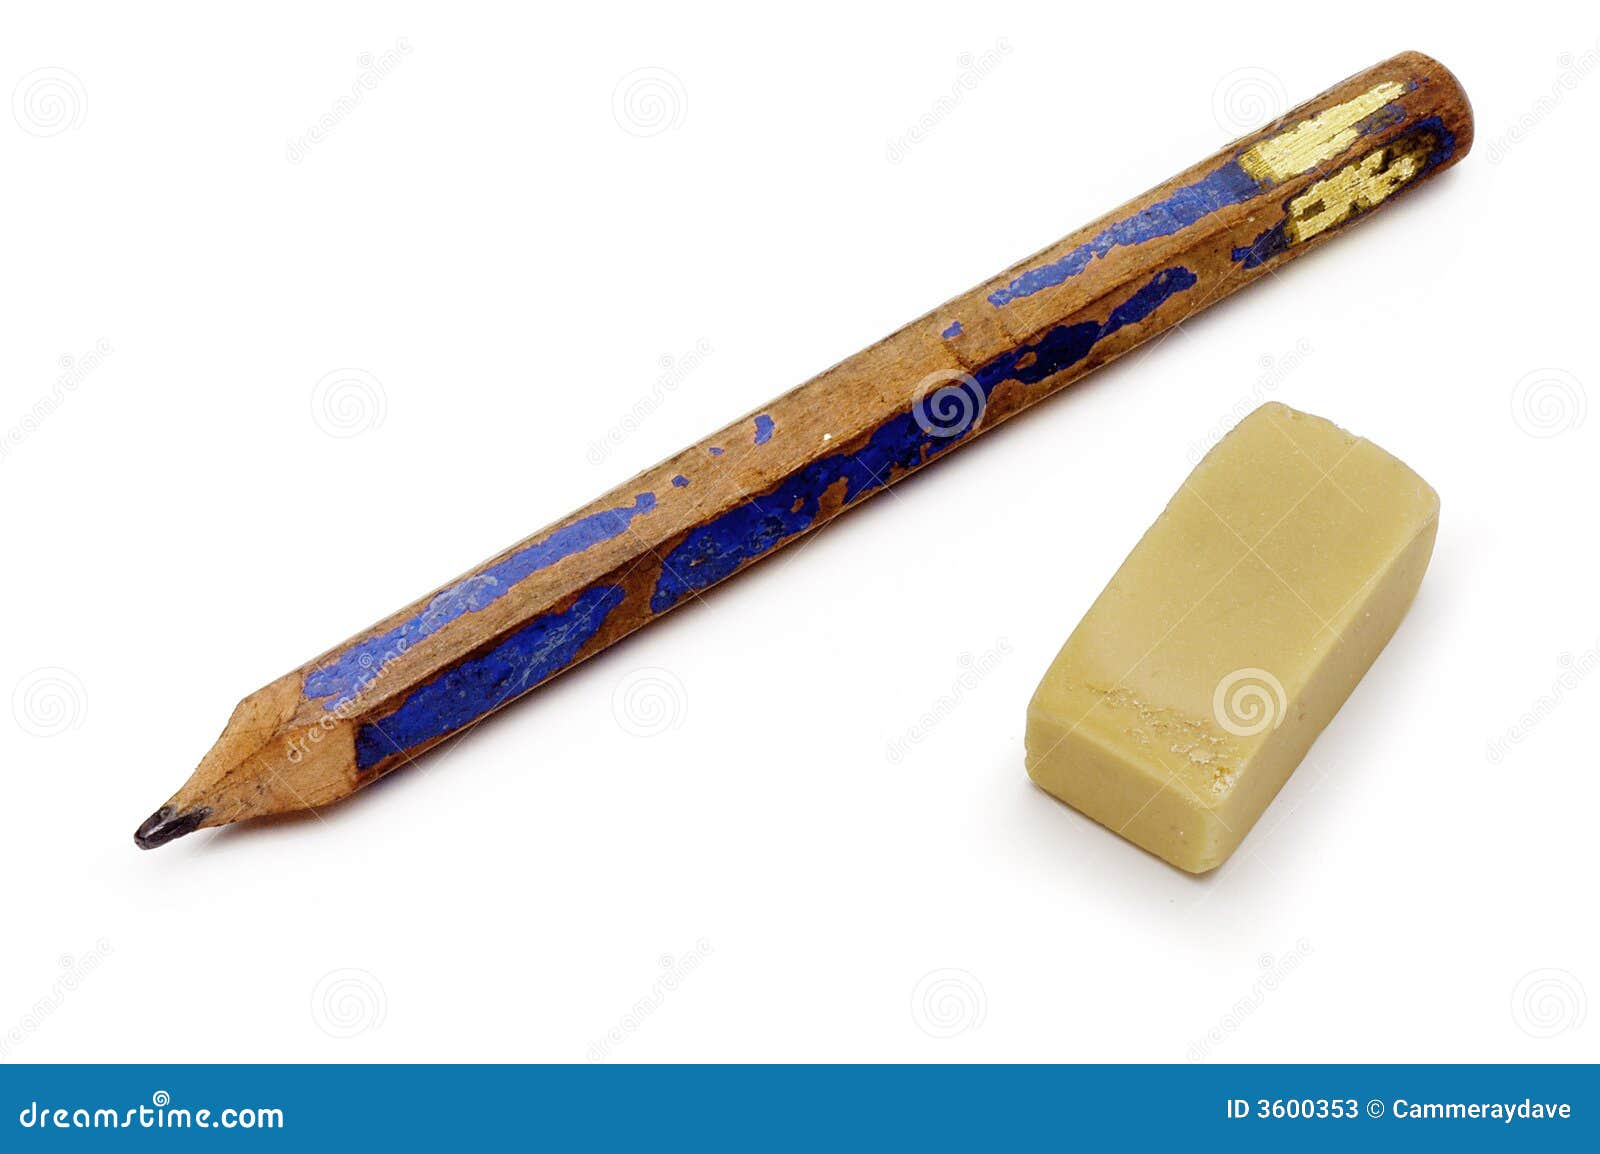 old pencil and eraser